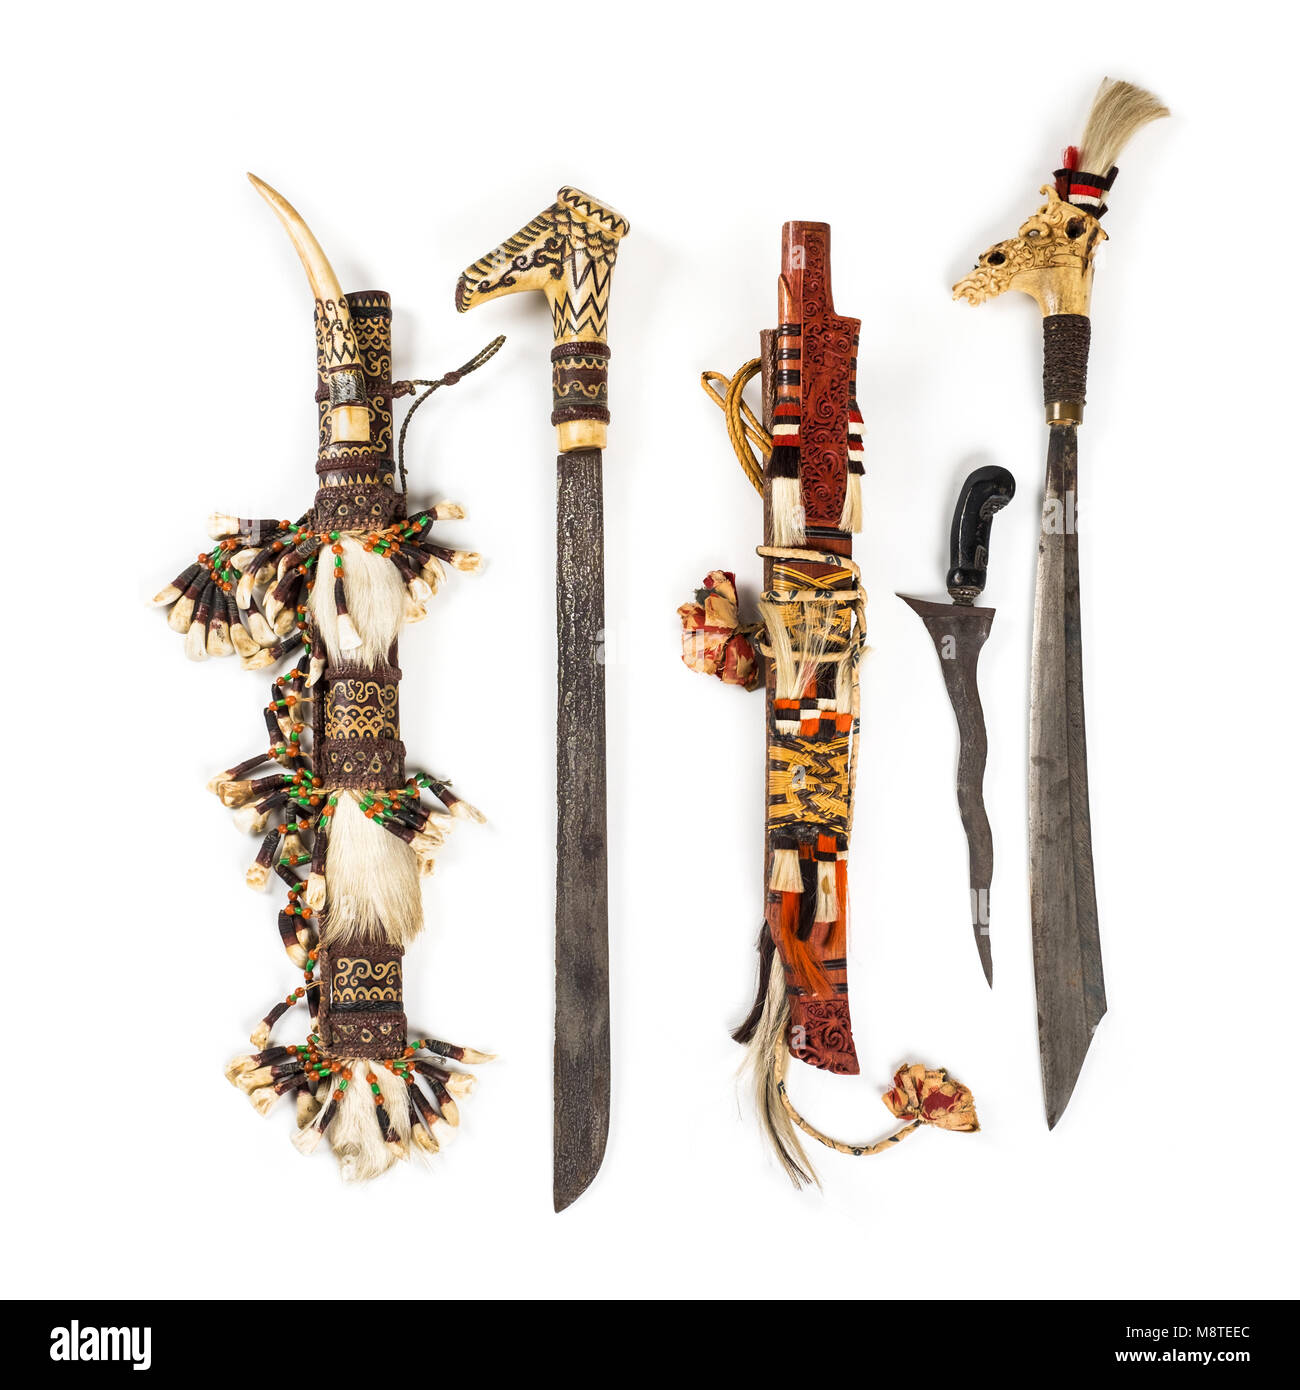 Pair of antique Mandau knives / ceremonial headhunting swords from the Dyak people of Borneo, complete with original wooden scabbards. Stock Photo